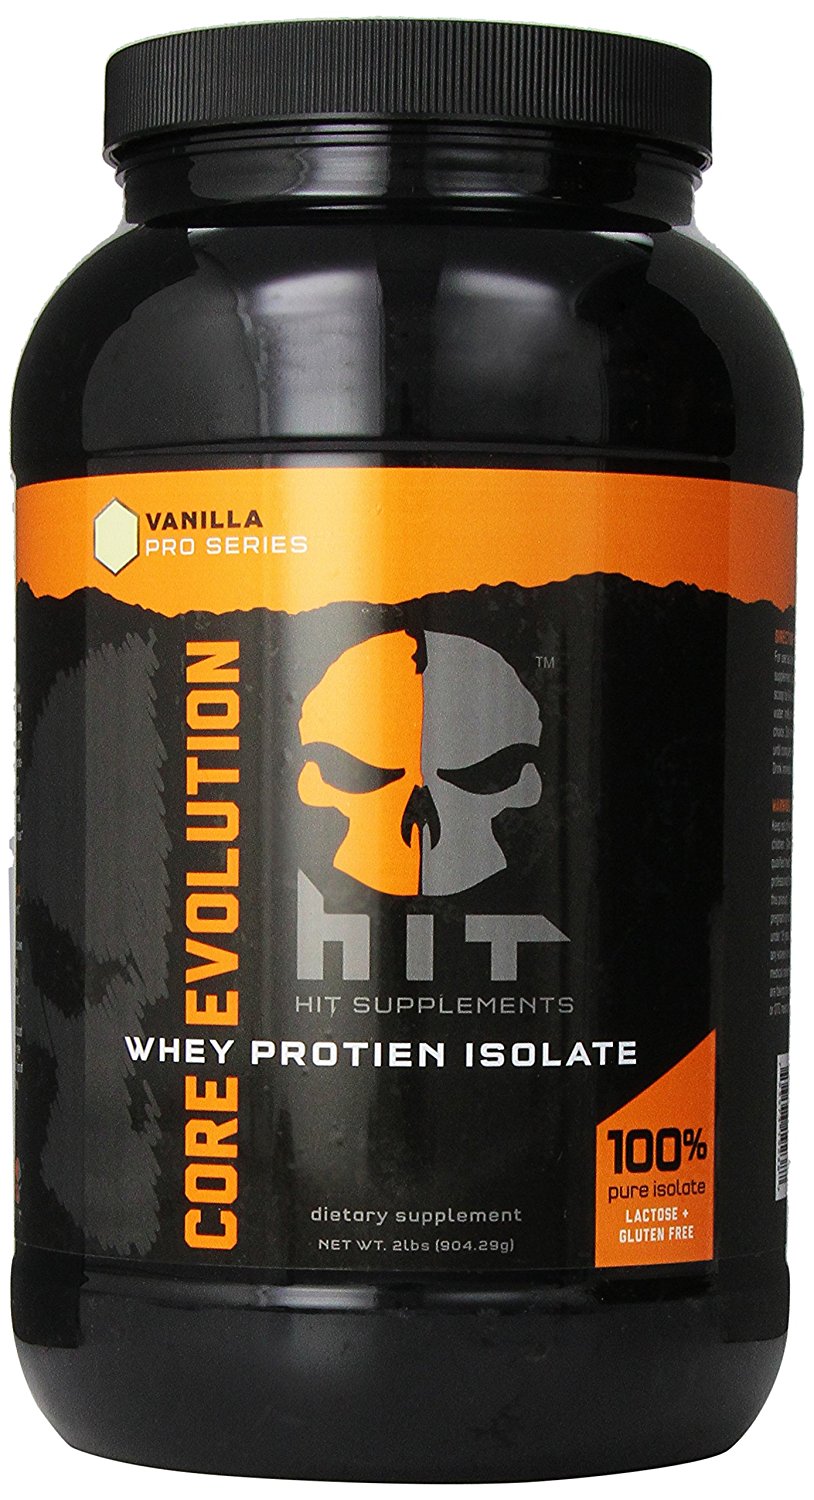 Evolution is a protein powder made from 100% whey protein isolate and is pa...